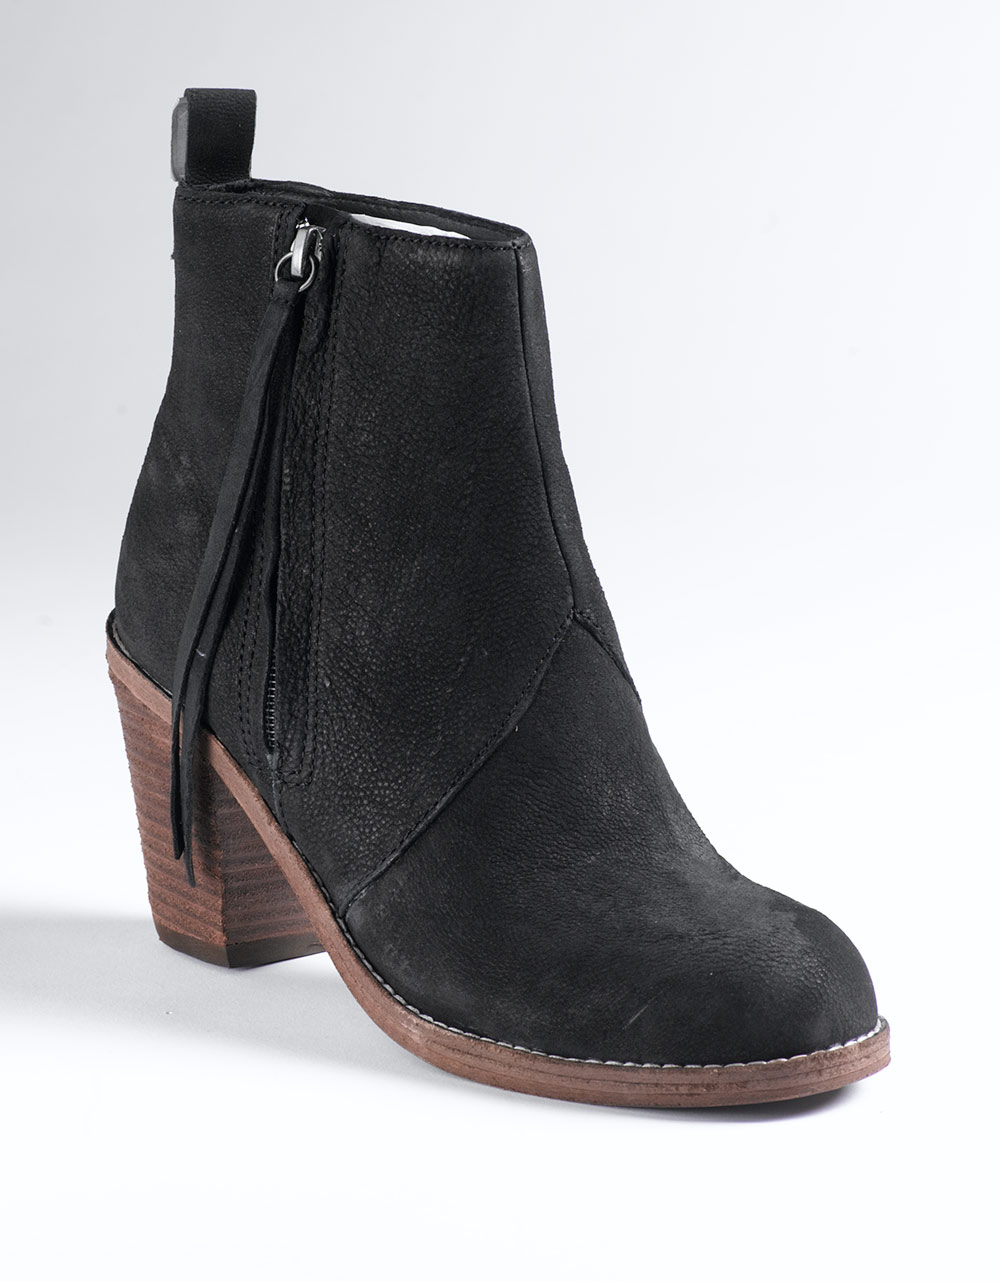 Lyst - Dolce Vita Jax Ankle Boots in Black